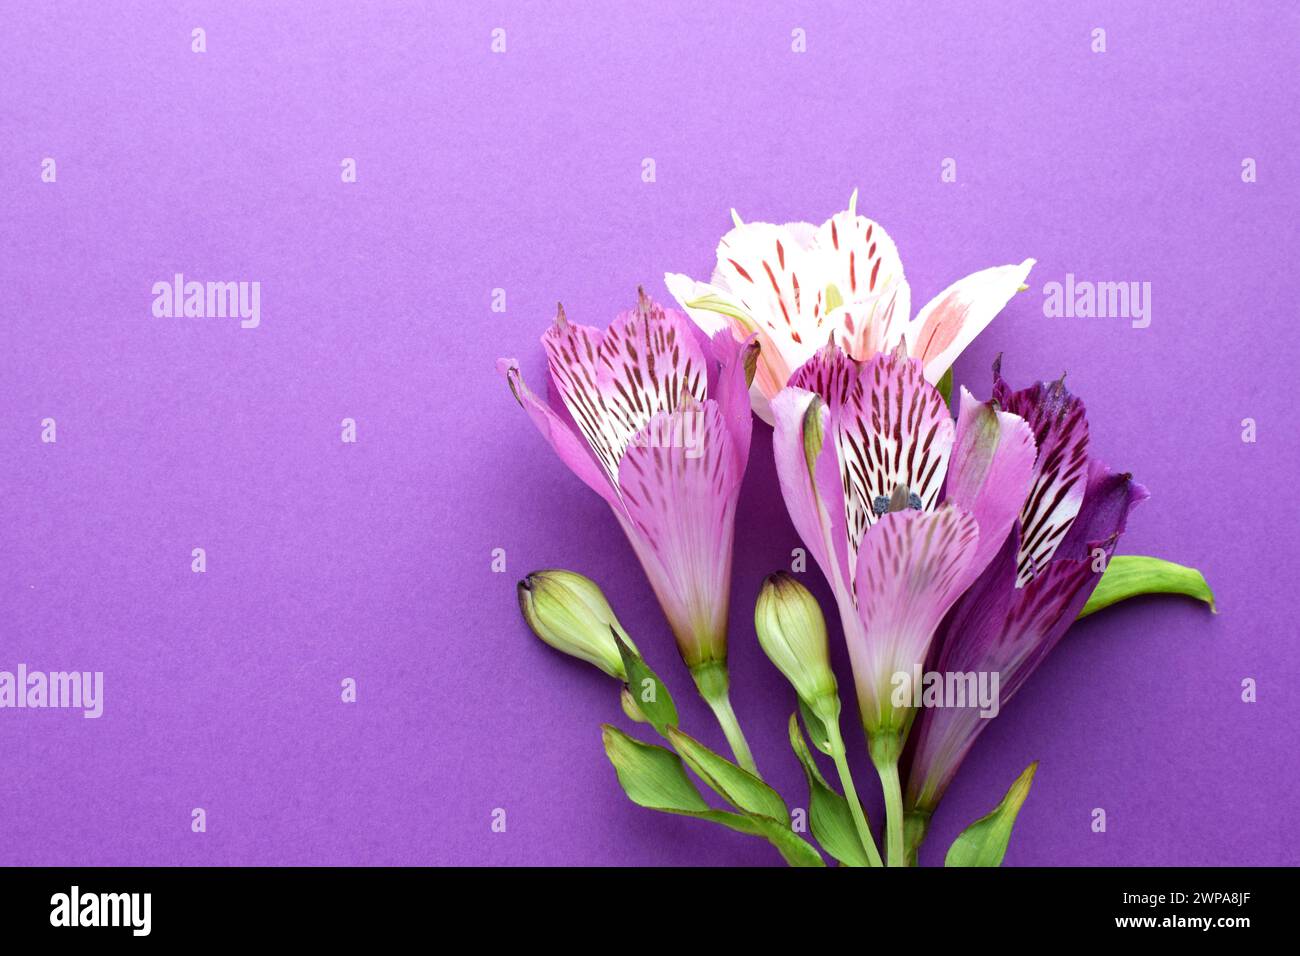 Beautiful pink and purple  alstroemeria flowers in green leaves on a pink background. Peruvian Lily. Copy space. Stock Photo